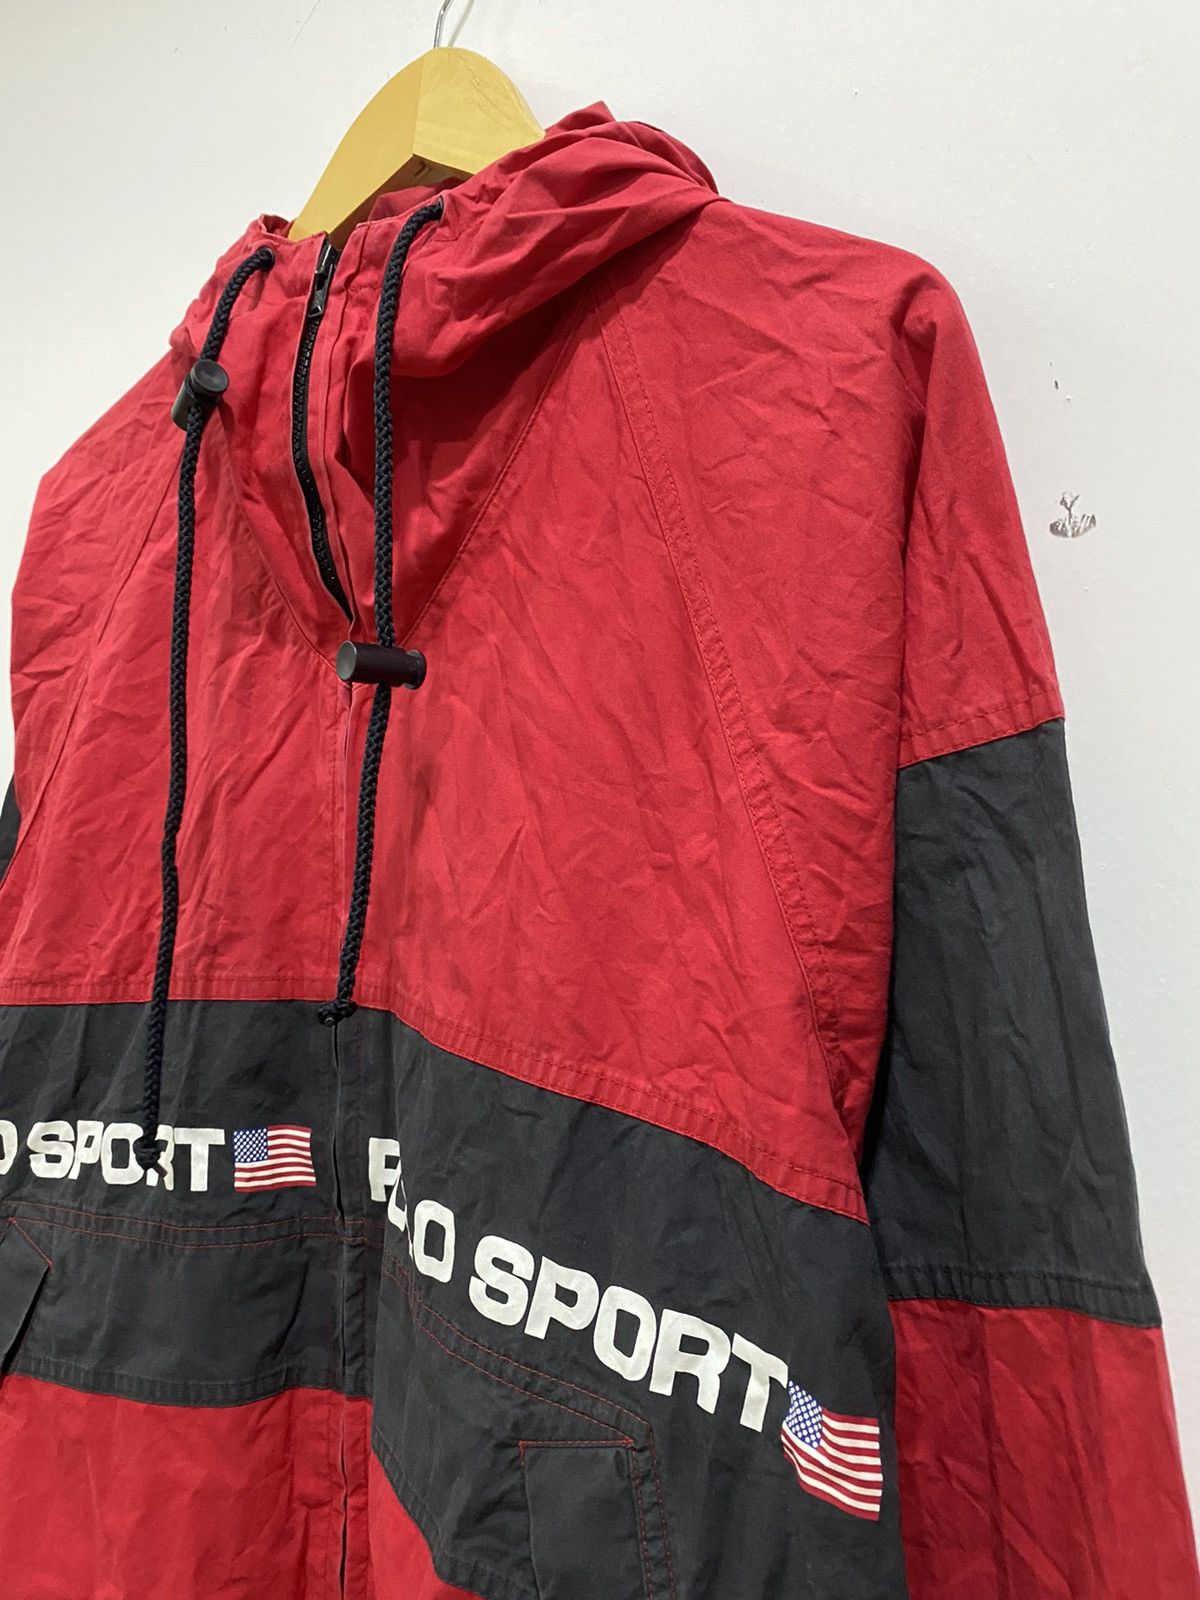 Vintage Polo Sport Ralph Lauren Spell Out Jacket - 15